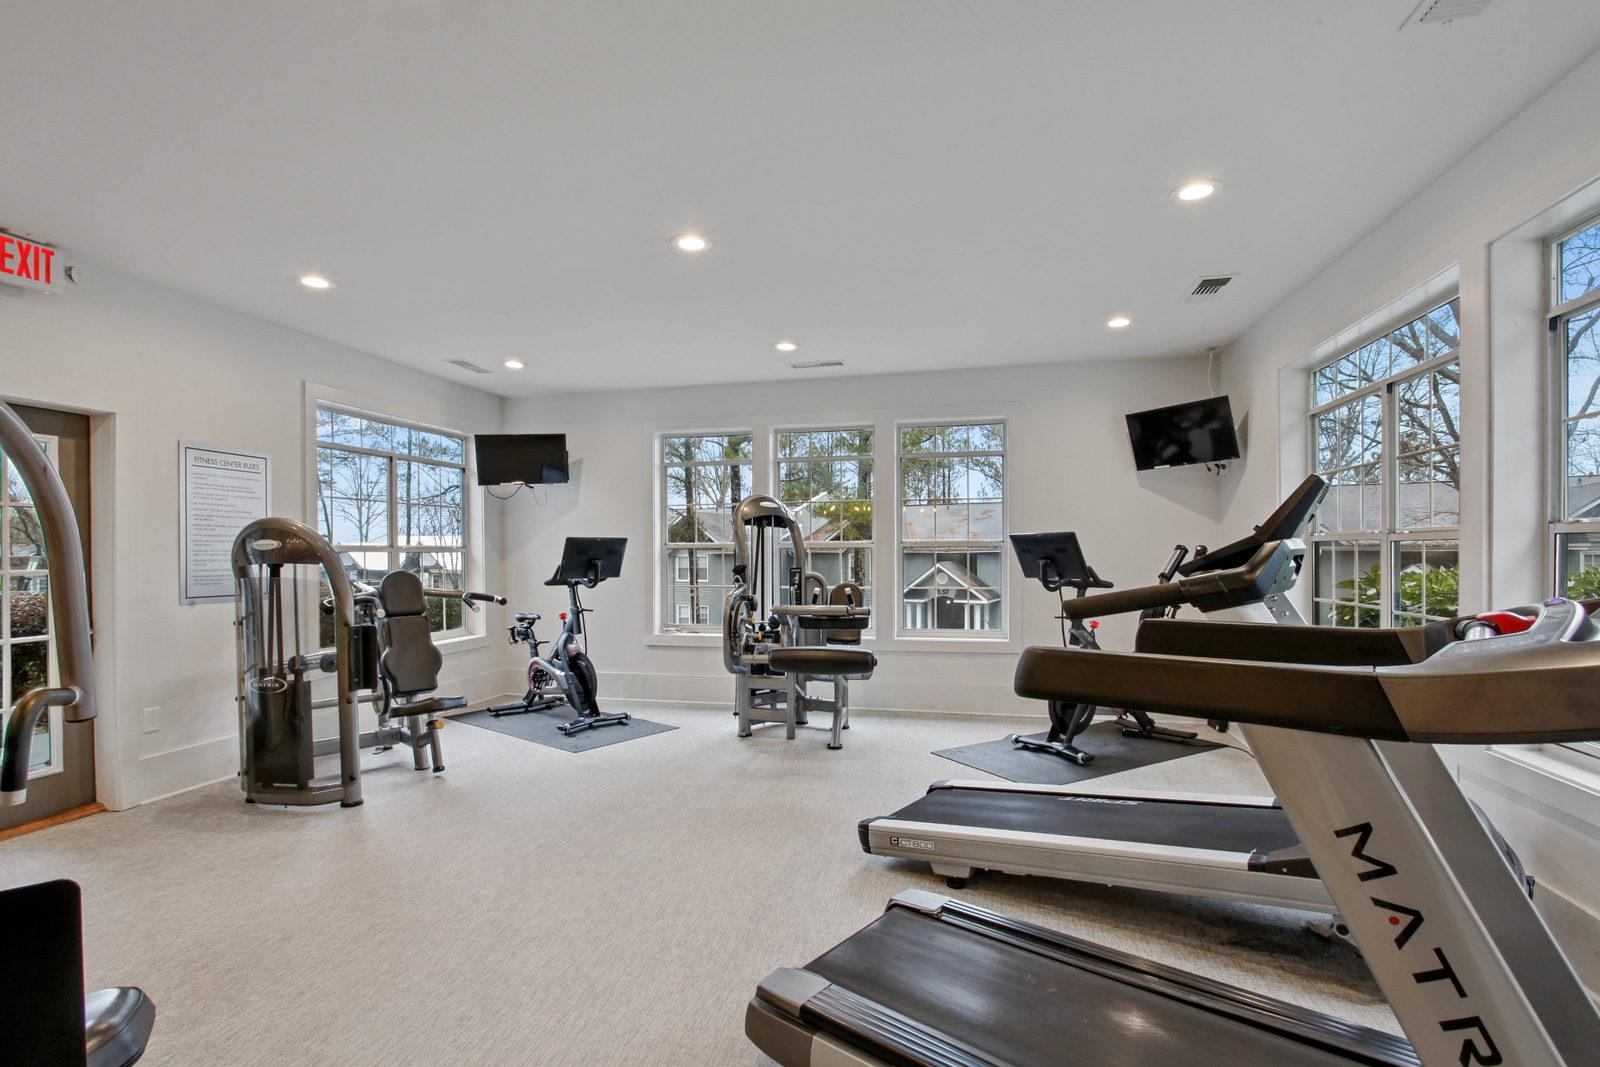 Fitness Center with treadmills and spin bikes